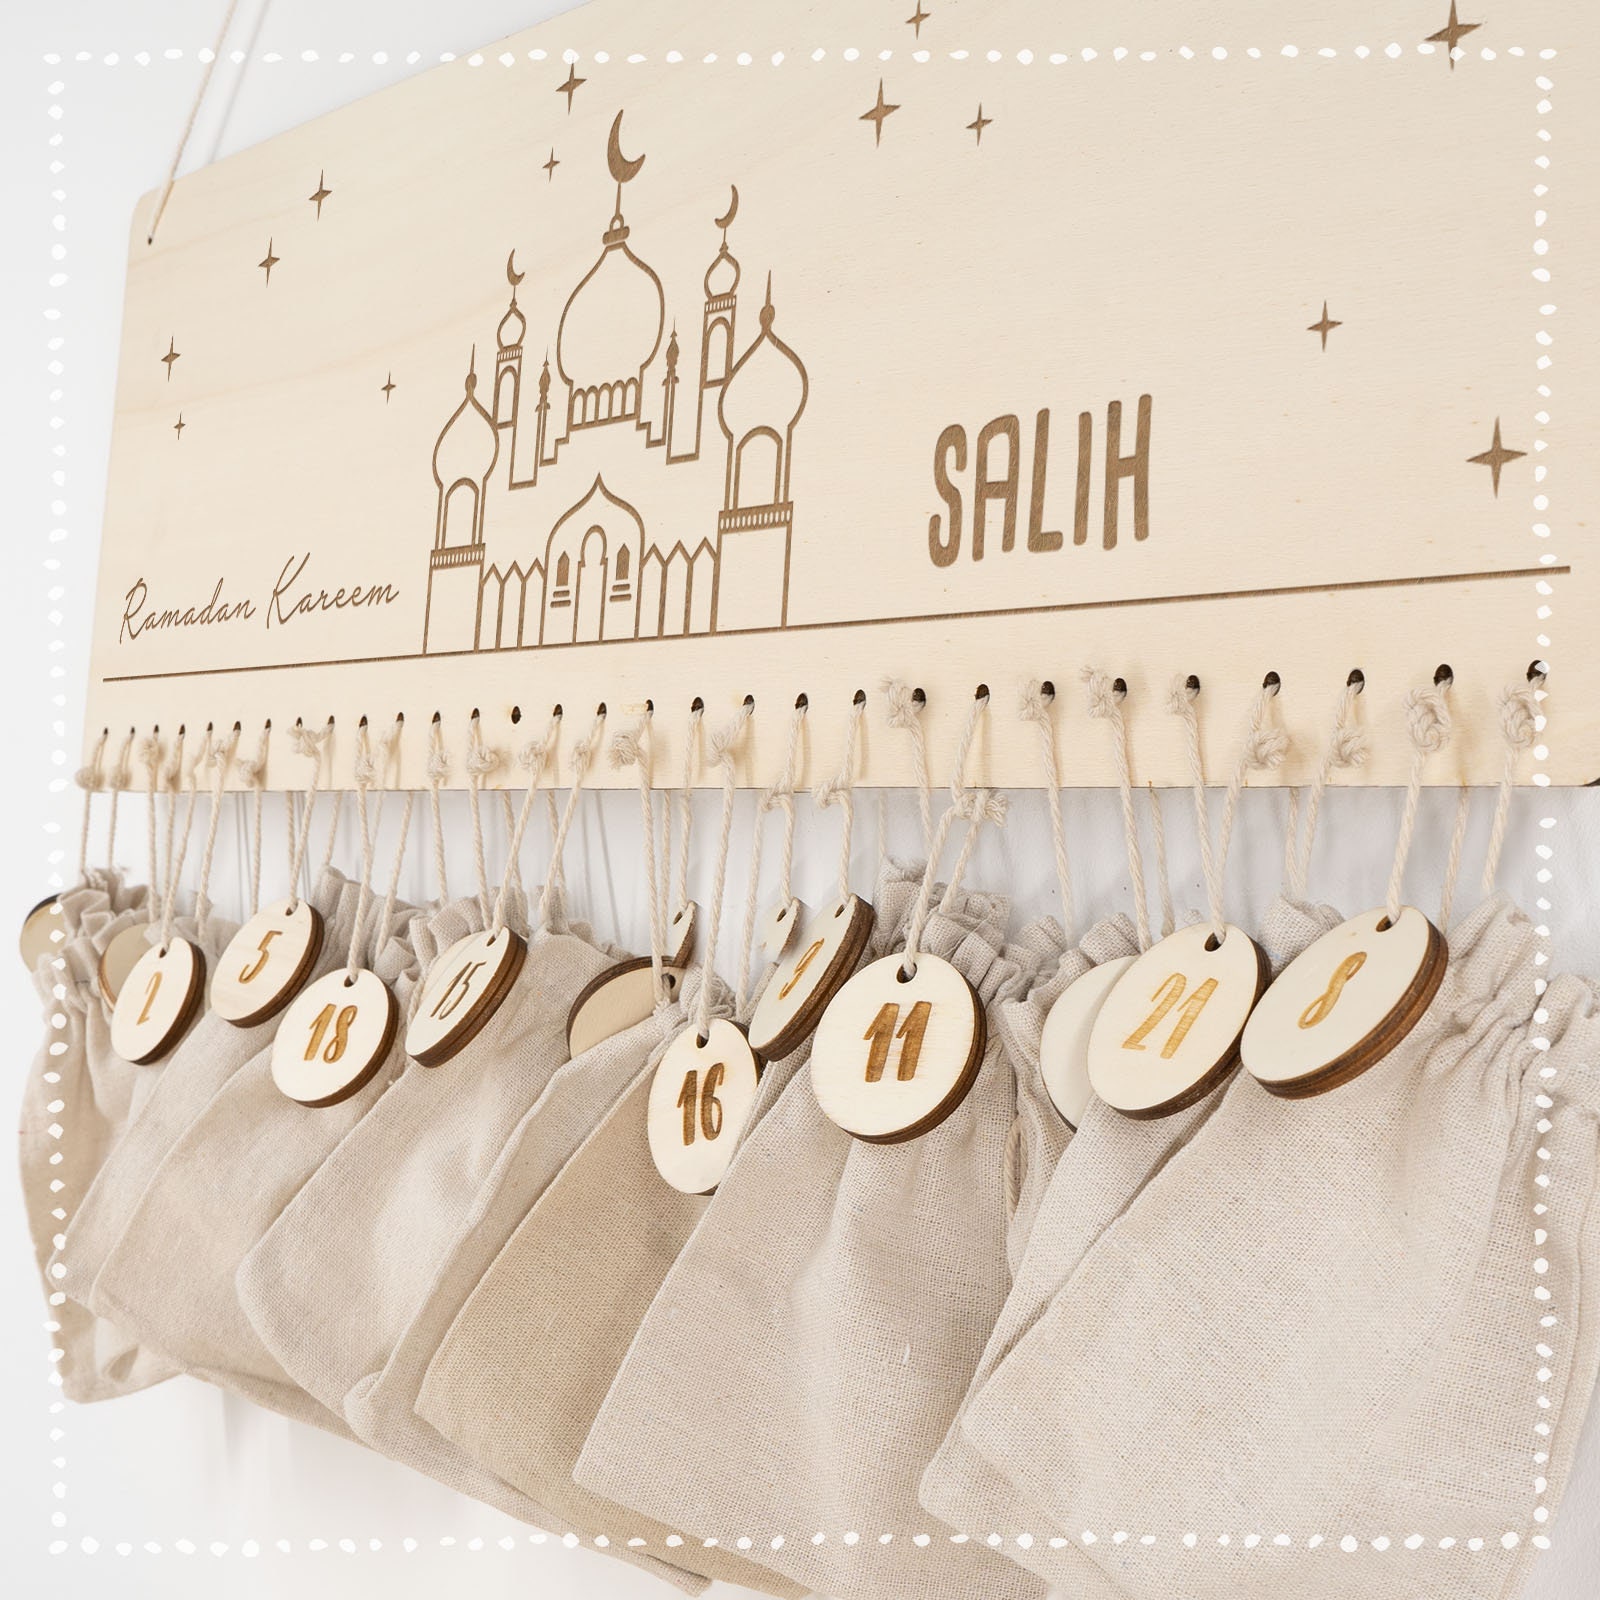 Ramadan Calendar for Children Personalized With Name Made of Wood Engraving  Jute Bag With Numbers Optional mosque Figure Ramadan Kareem 